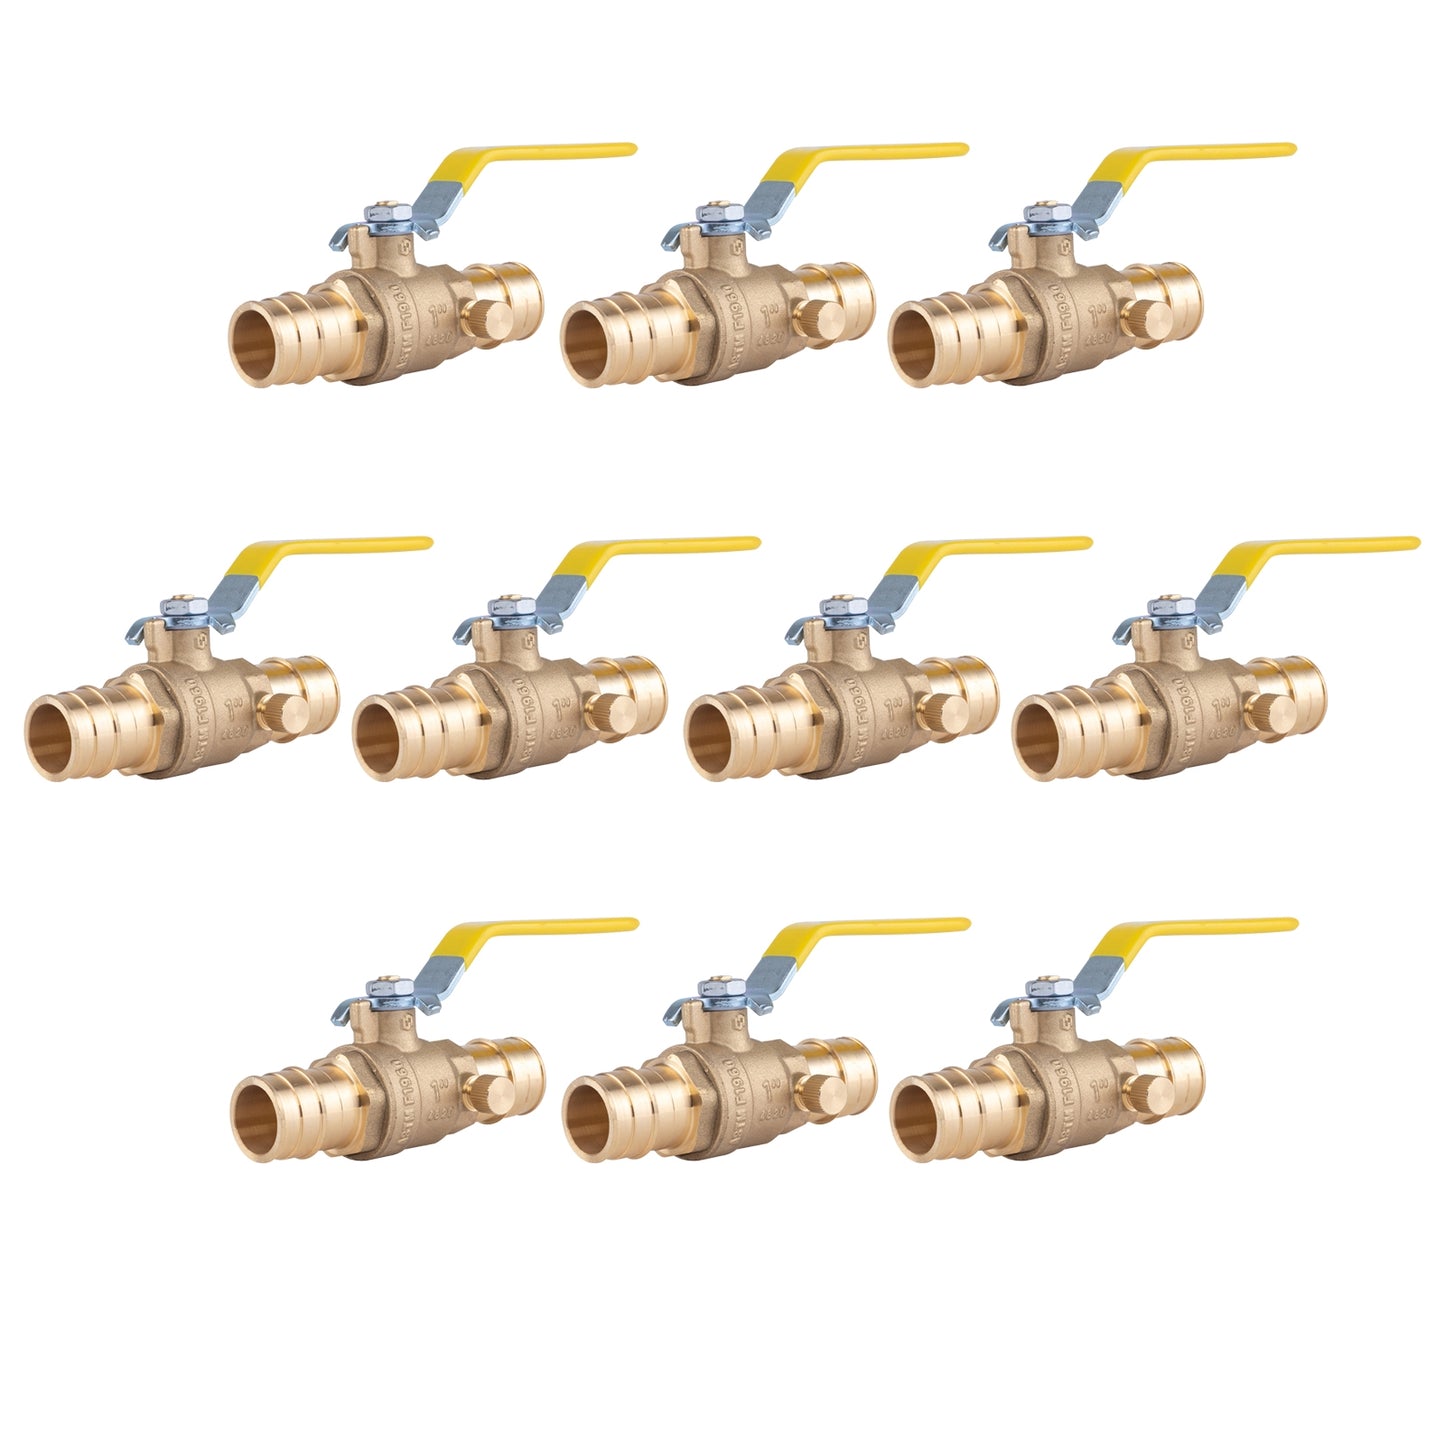 Hausen 1-inch PEX Standard Port Brass Ball Valve with Drain; Lead Free Forged Brass; Blowout Resistant Stem; cUPC/ANSI/NSF Certified; For Use in Potable Water, Oil and Gas Distribution Systems, 10-Pack